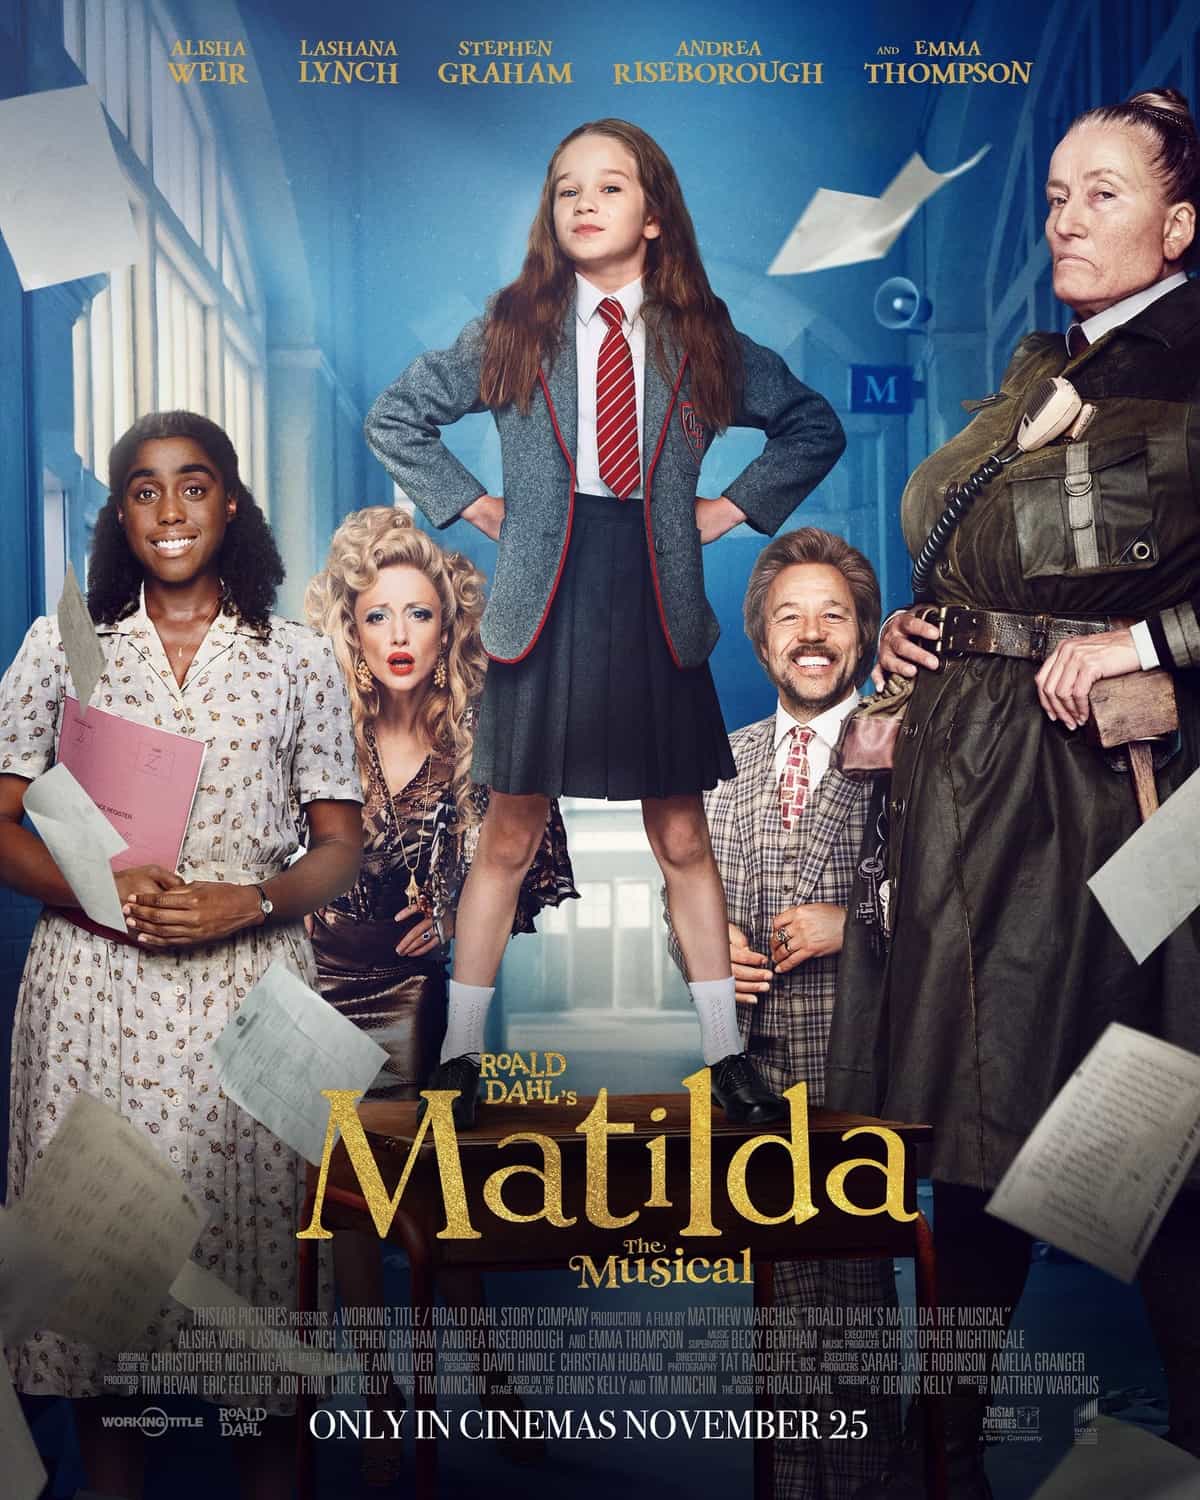 UK Box Office Weekend Report 2nd - 4th December 2022:  Matilda The Musical stays at the top for a second weekend while Violent Night is new at 3